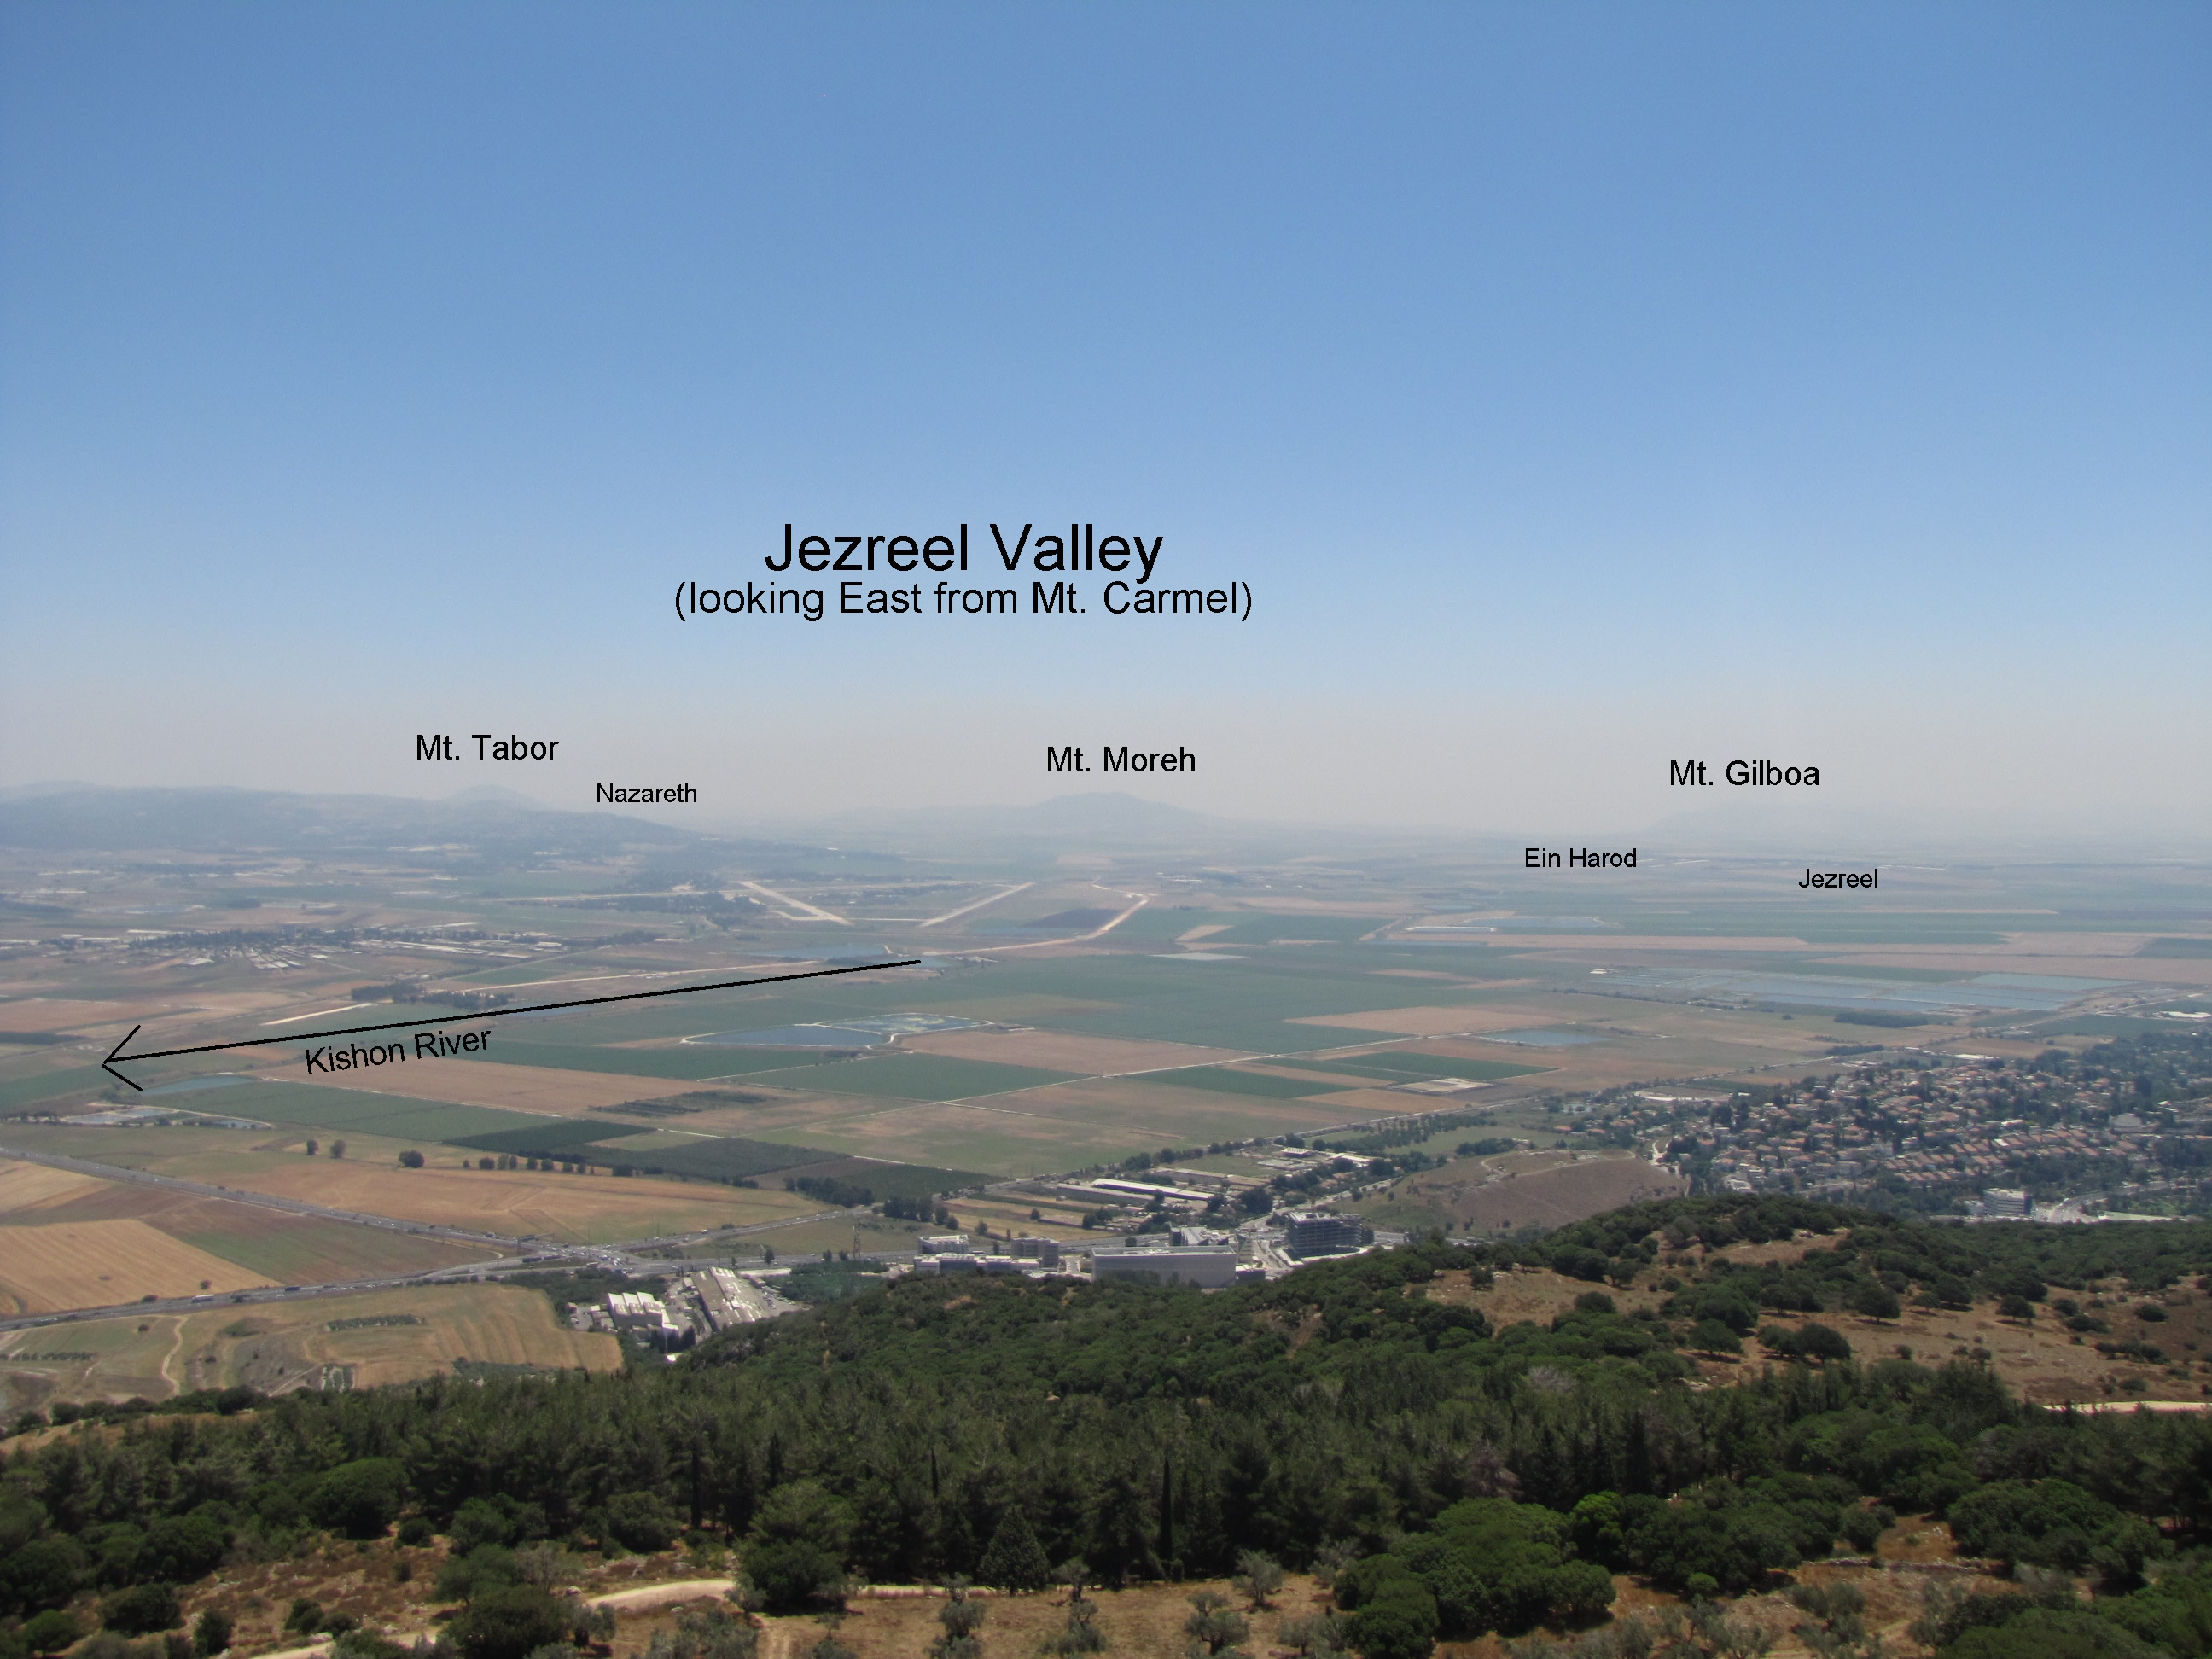 Jezreel Valley from Mount Carmel - labeled